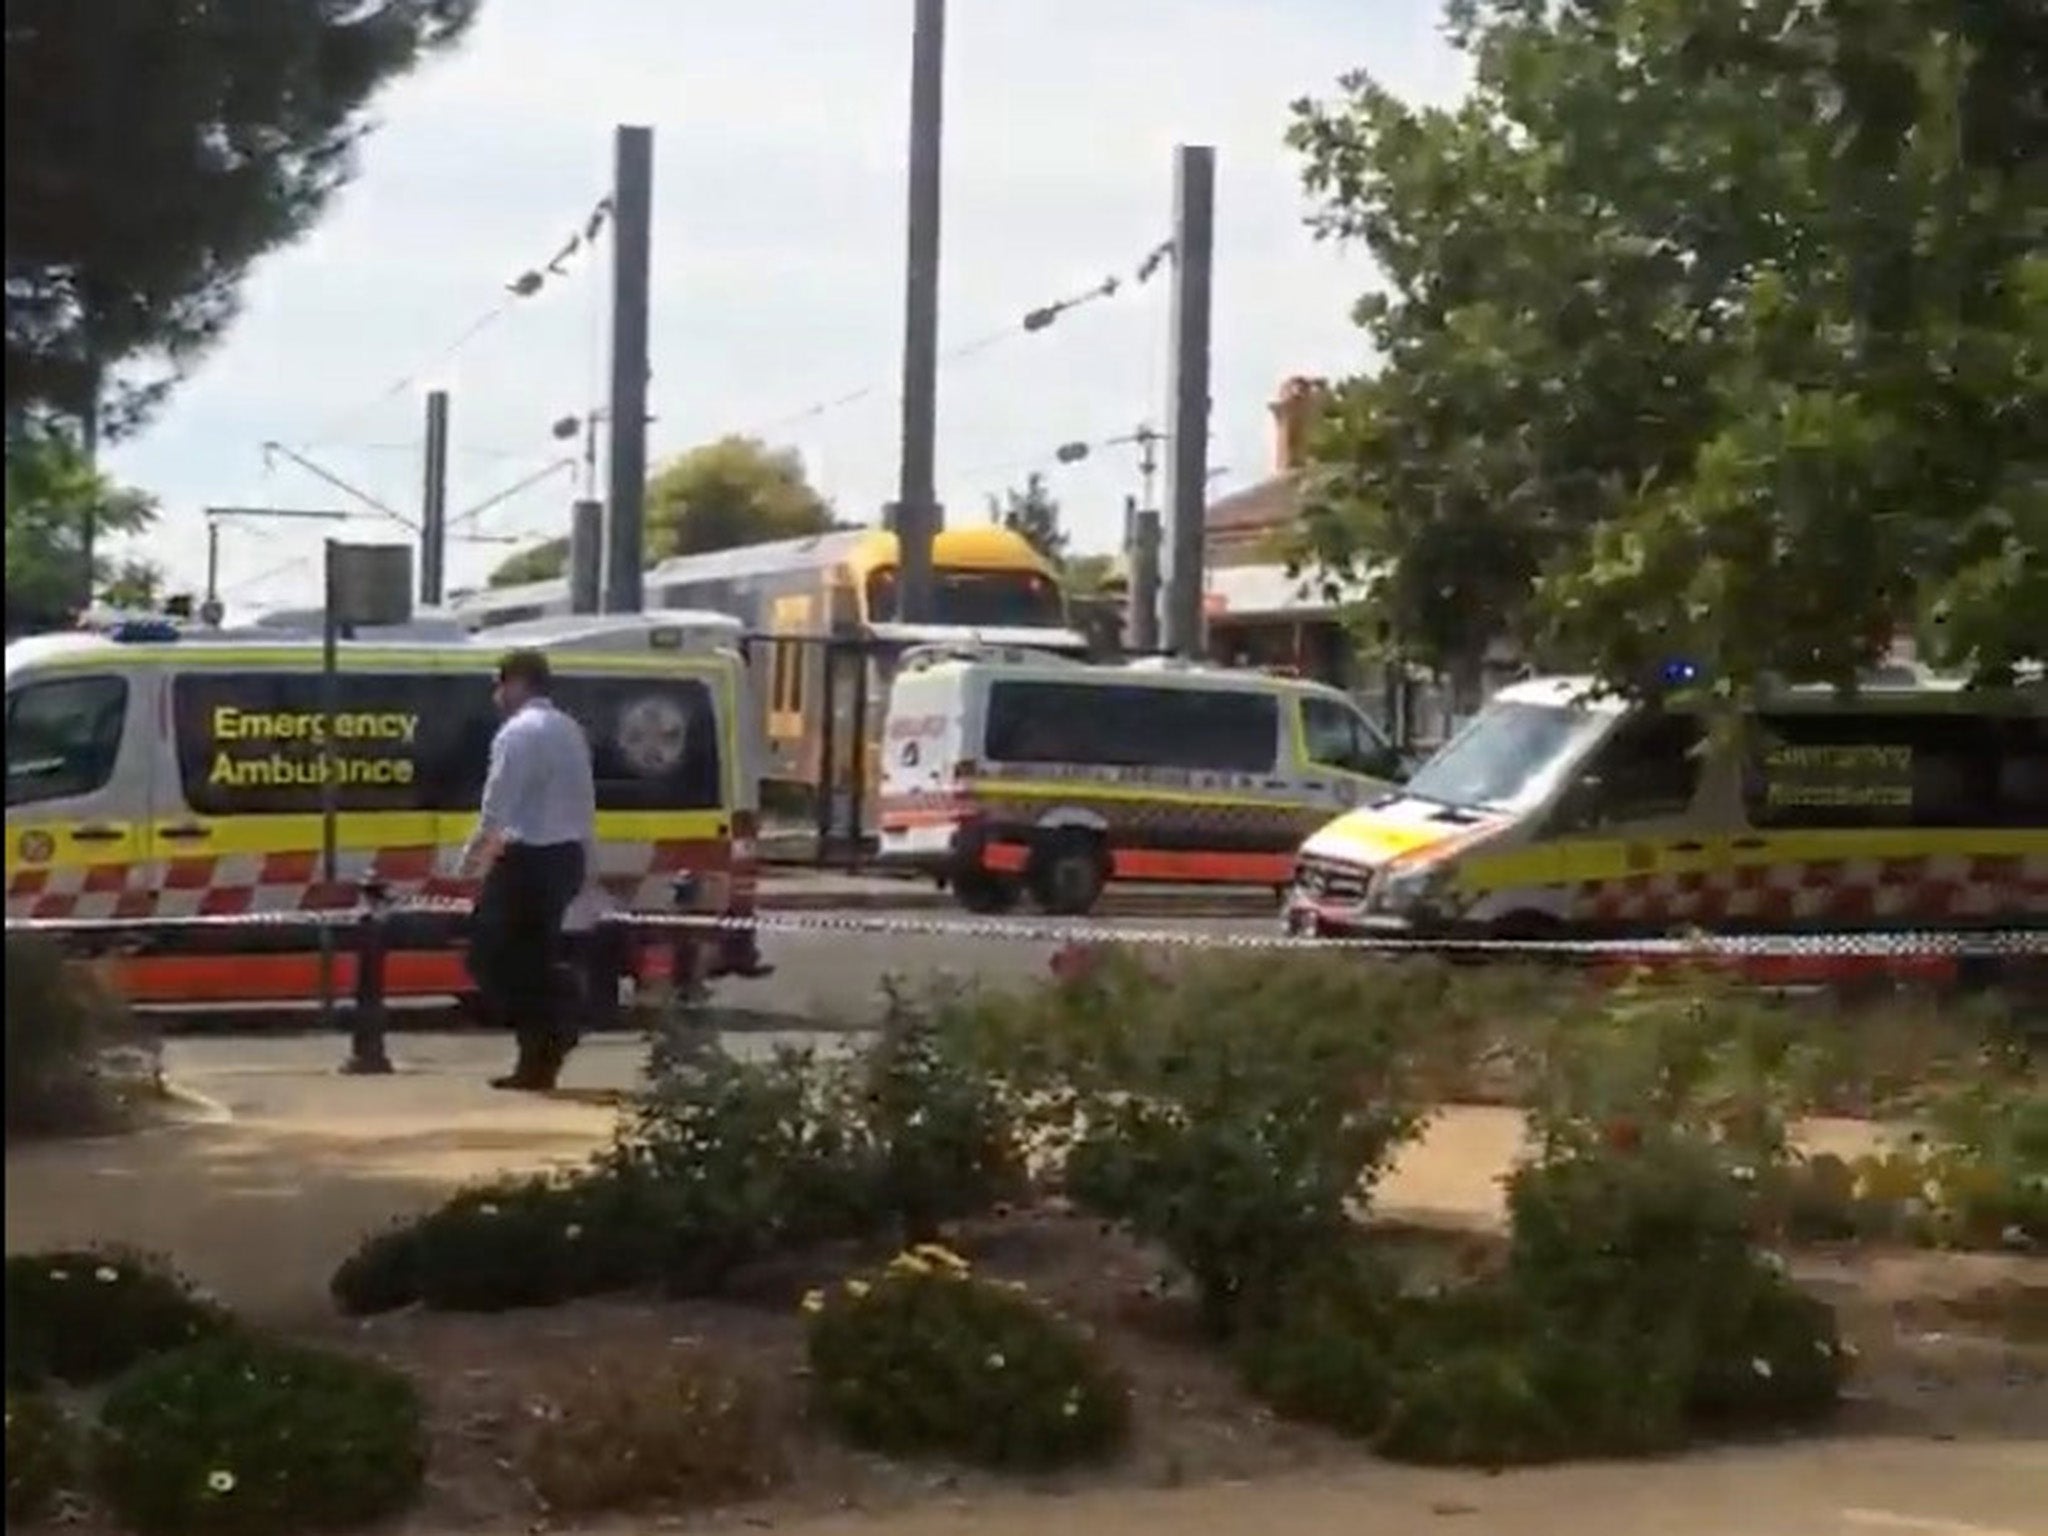 Ambulances arrive at the Richmond Station where a train crashed into buffers, injuring passengers